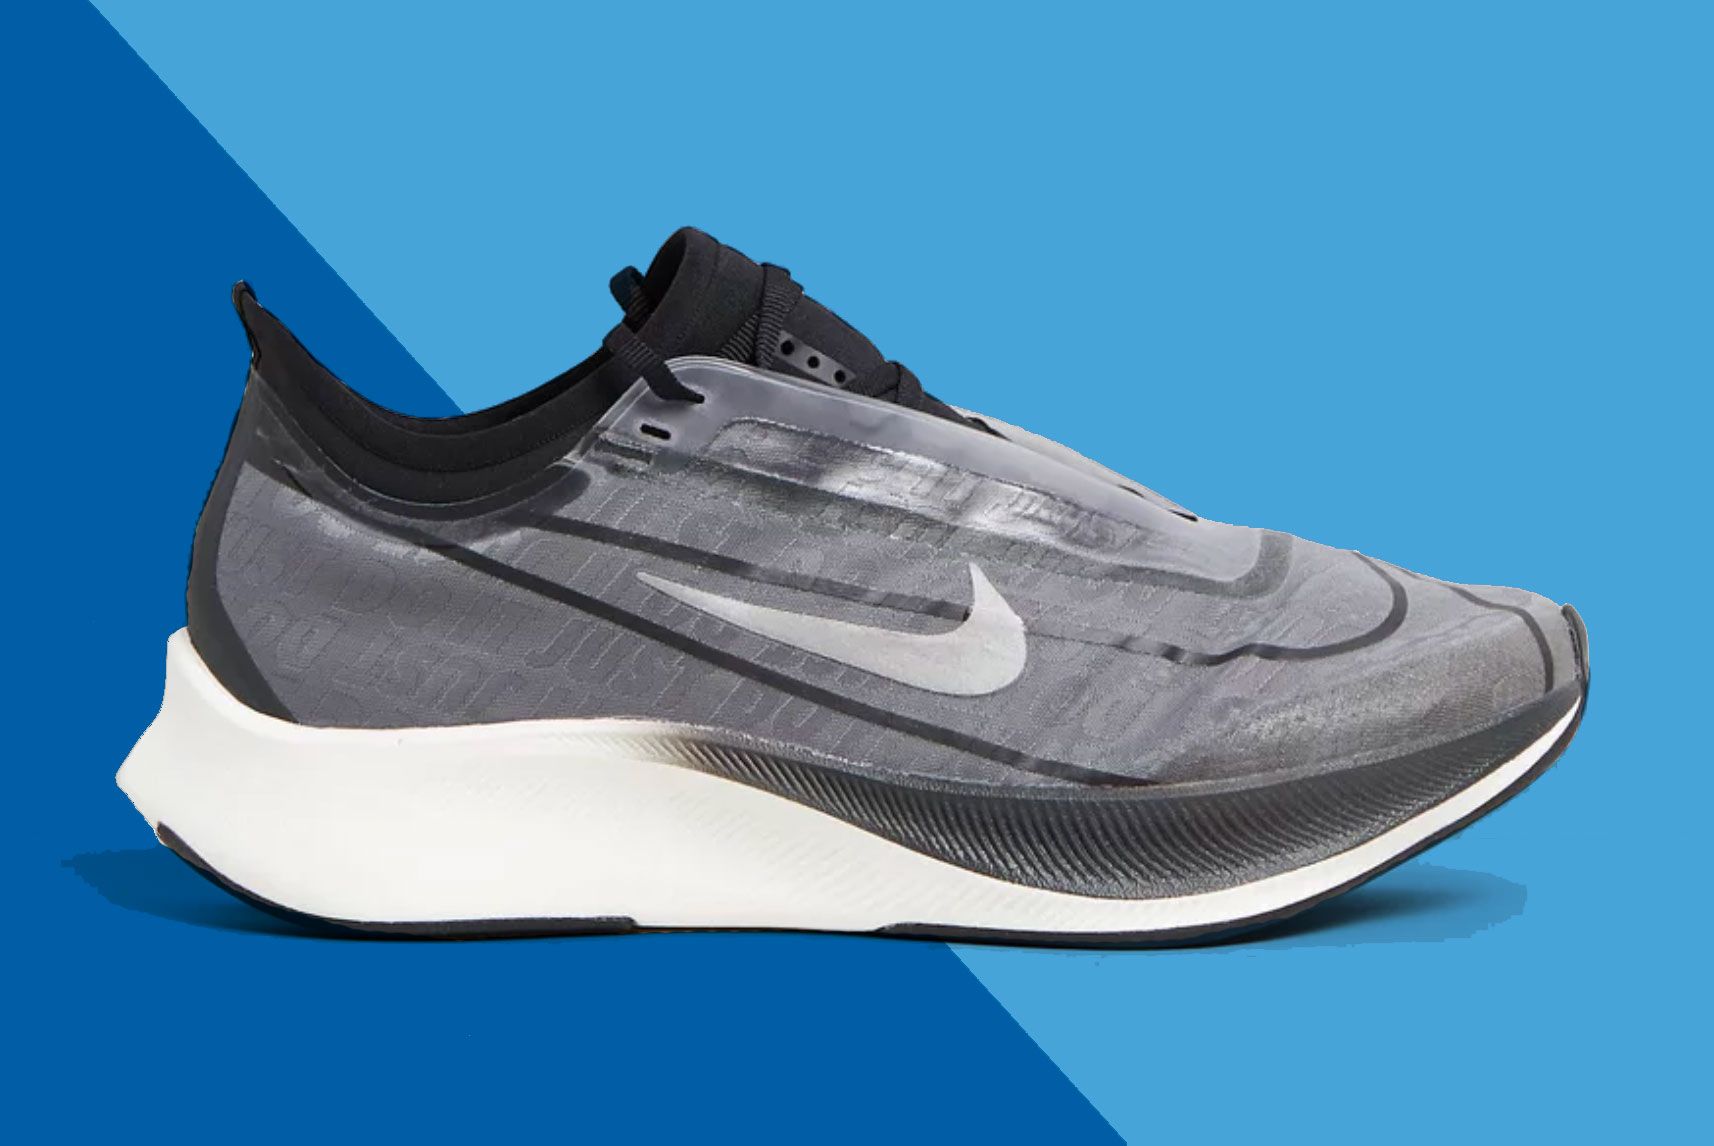 Awesome park bouquet Get 25% Off a Huge Range of Performance Sneakers from Nike, adidas and More  with THE ICONIC's Afterpay Day Sale - Sneaker Freaker